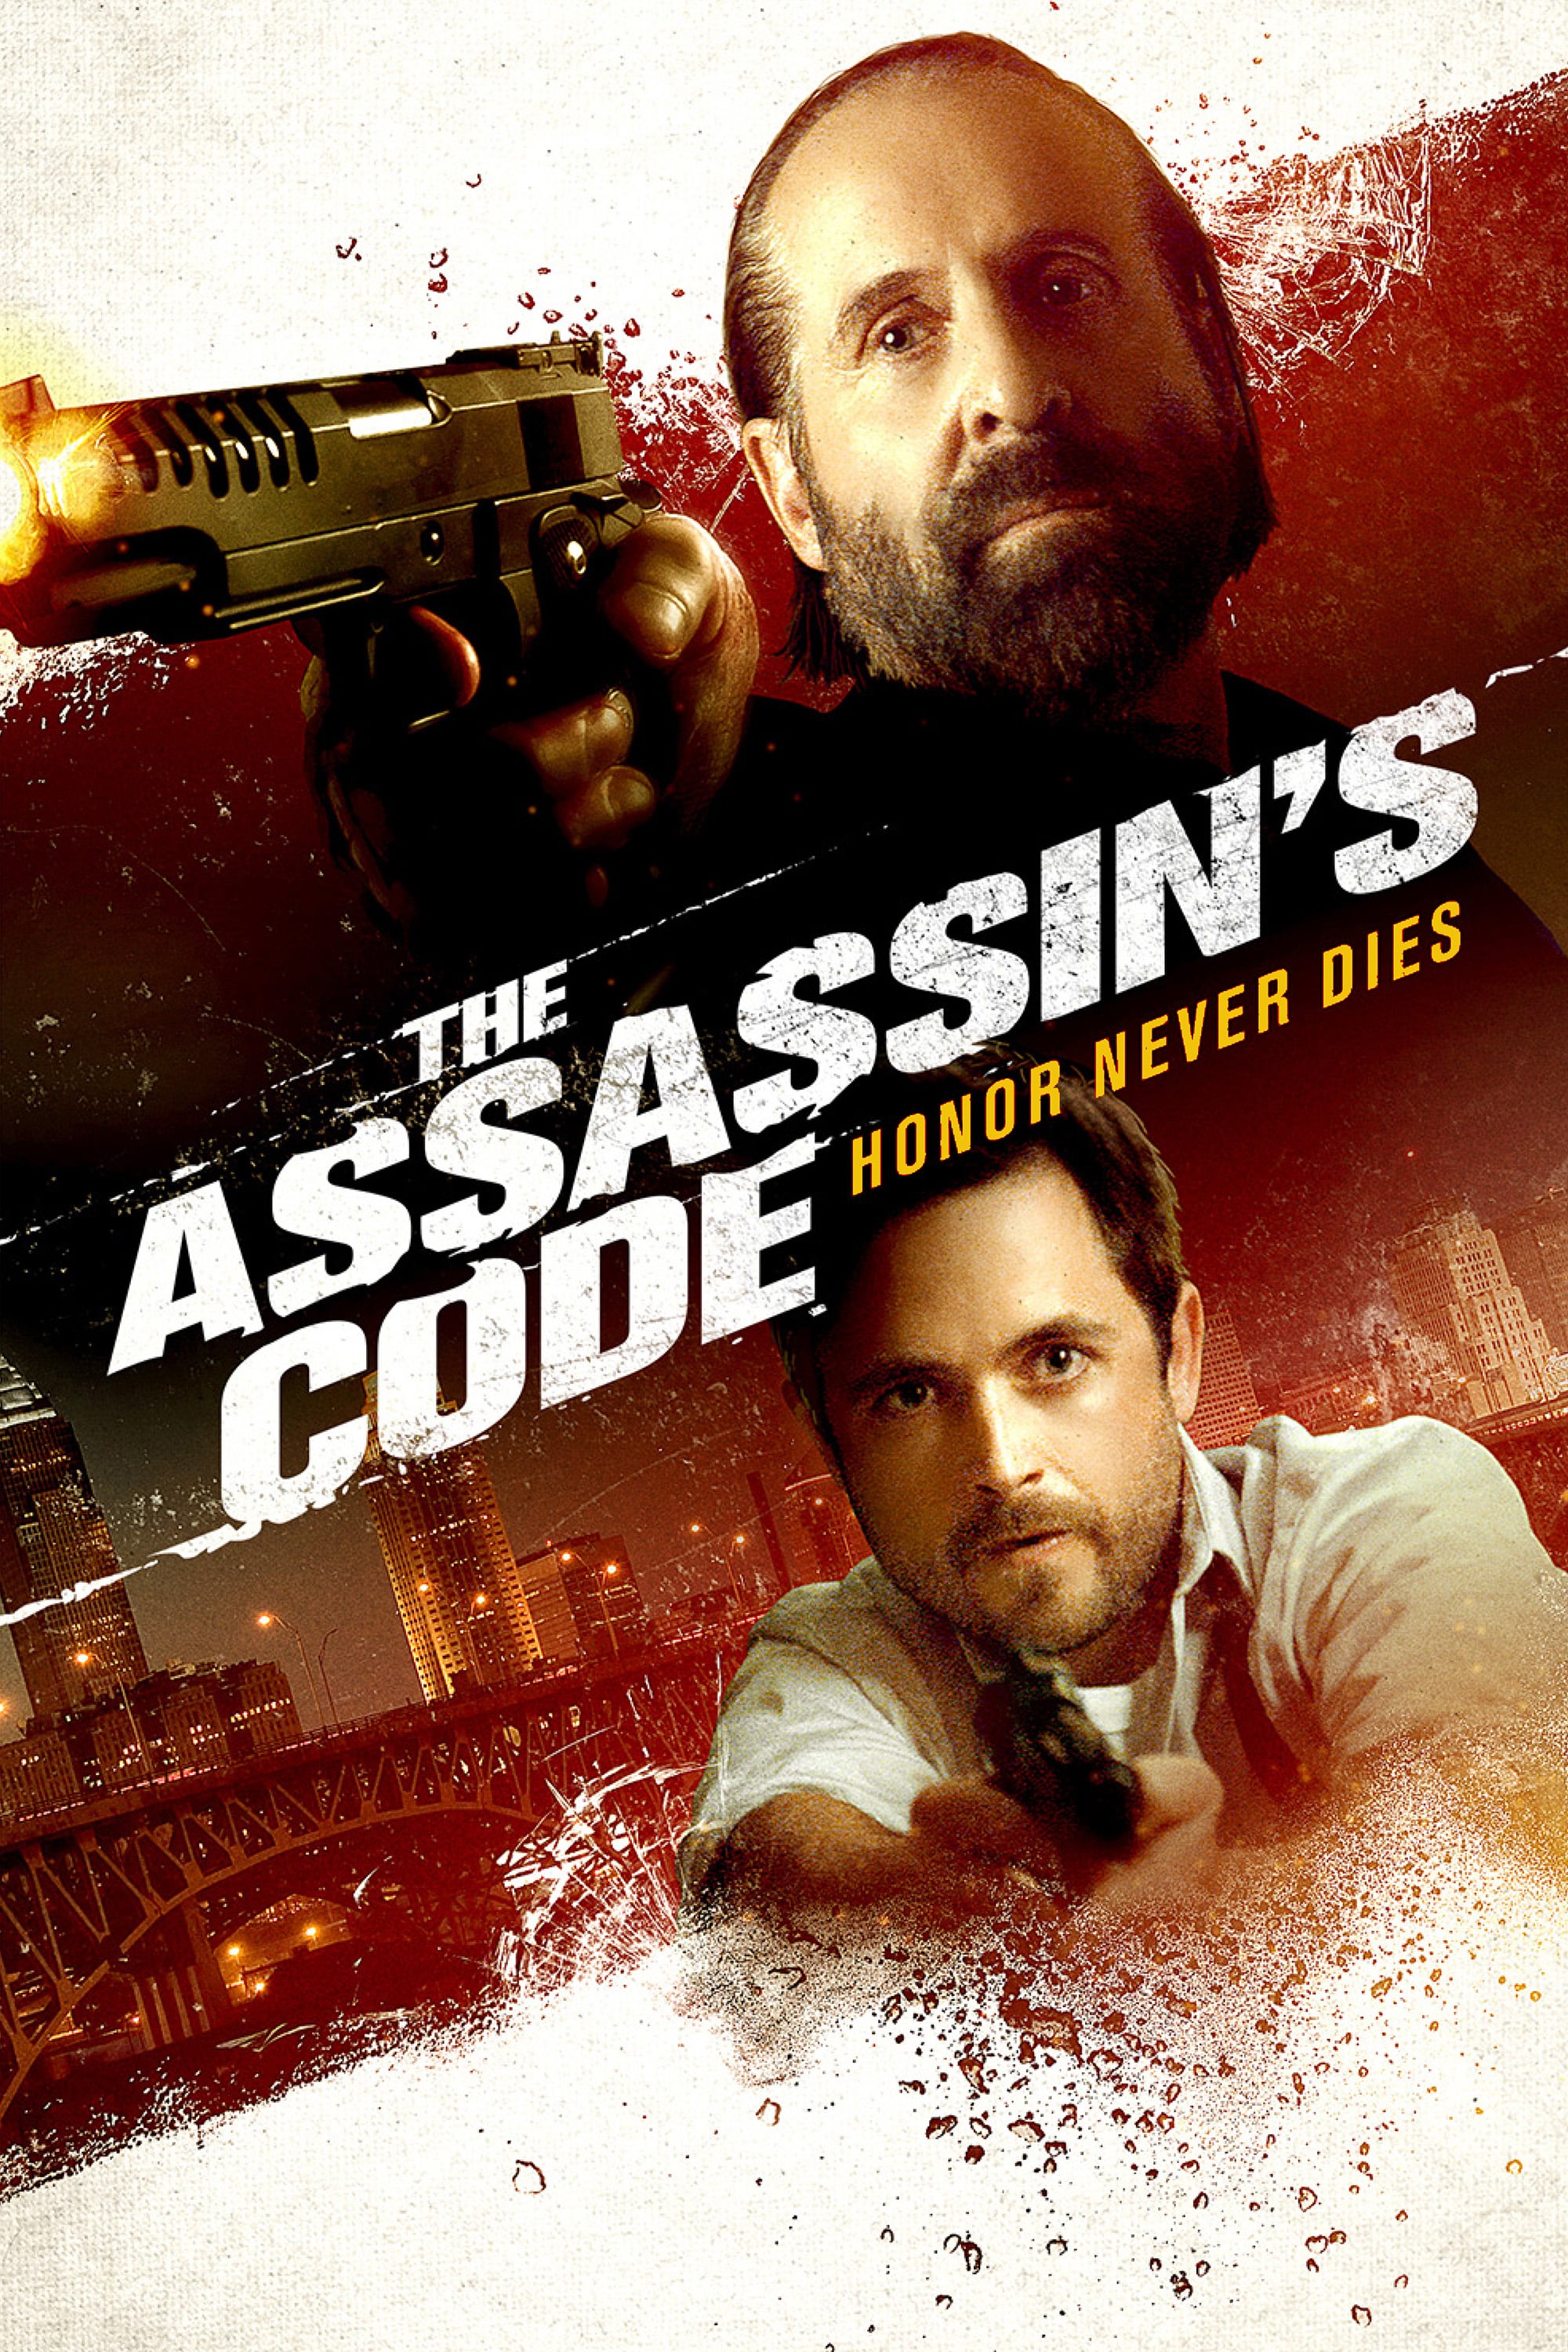 THE ASSASSIN S CODE